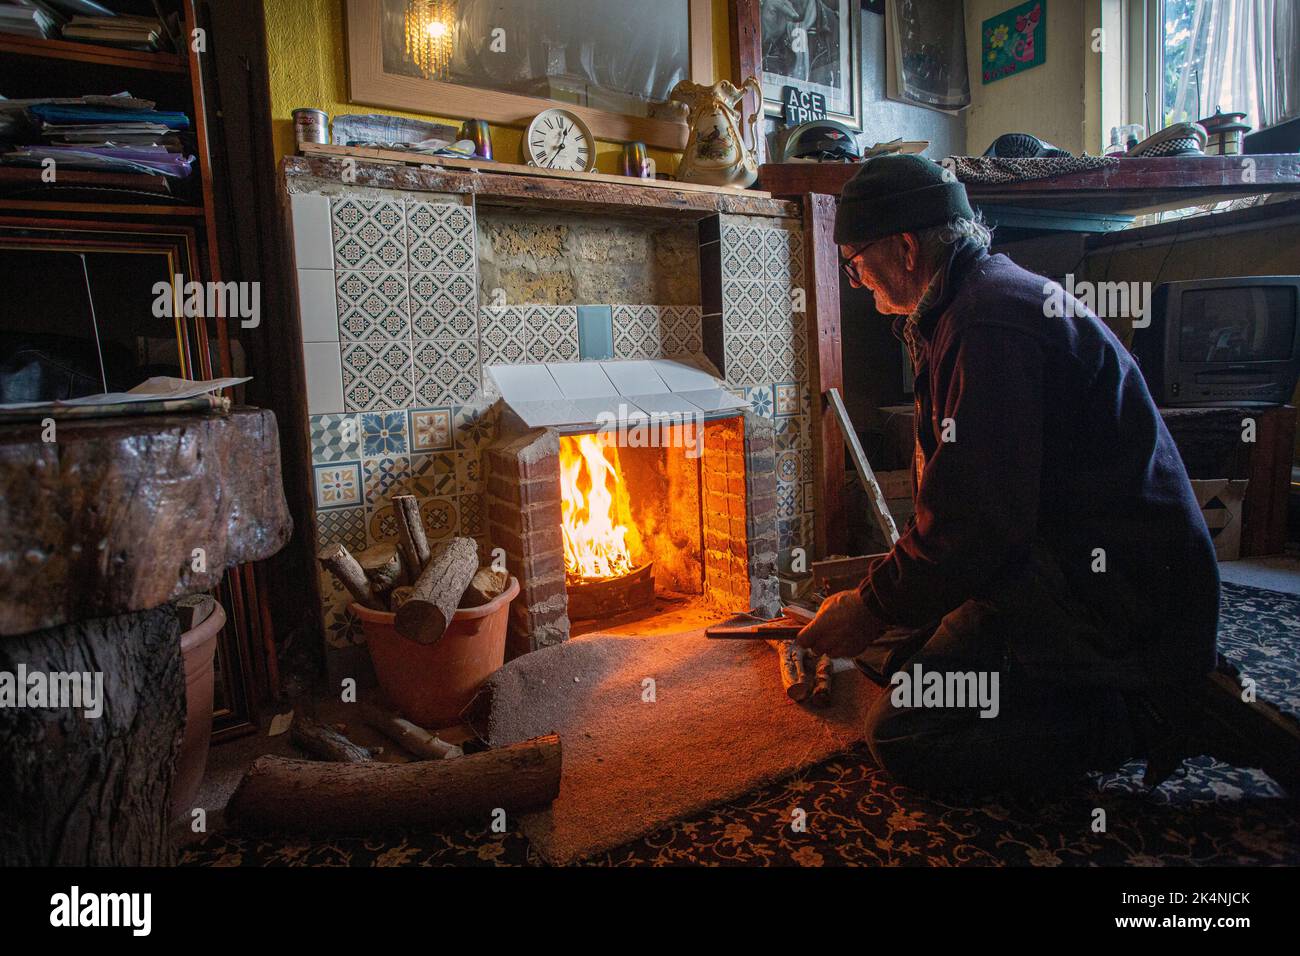 London, UK. Sept 29 2022 .Man was opening up his bricked up fireplace in the living room so he could burn wood to stay warm this winter. Stock Photo